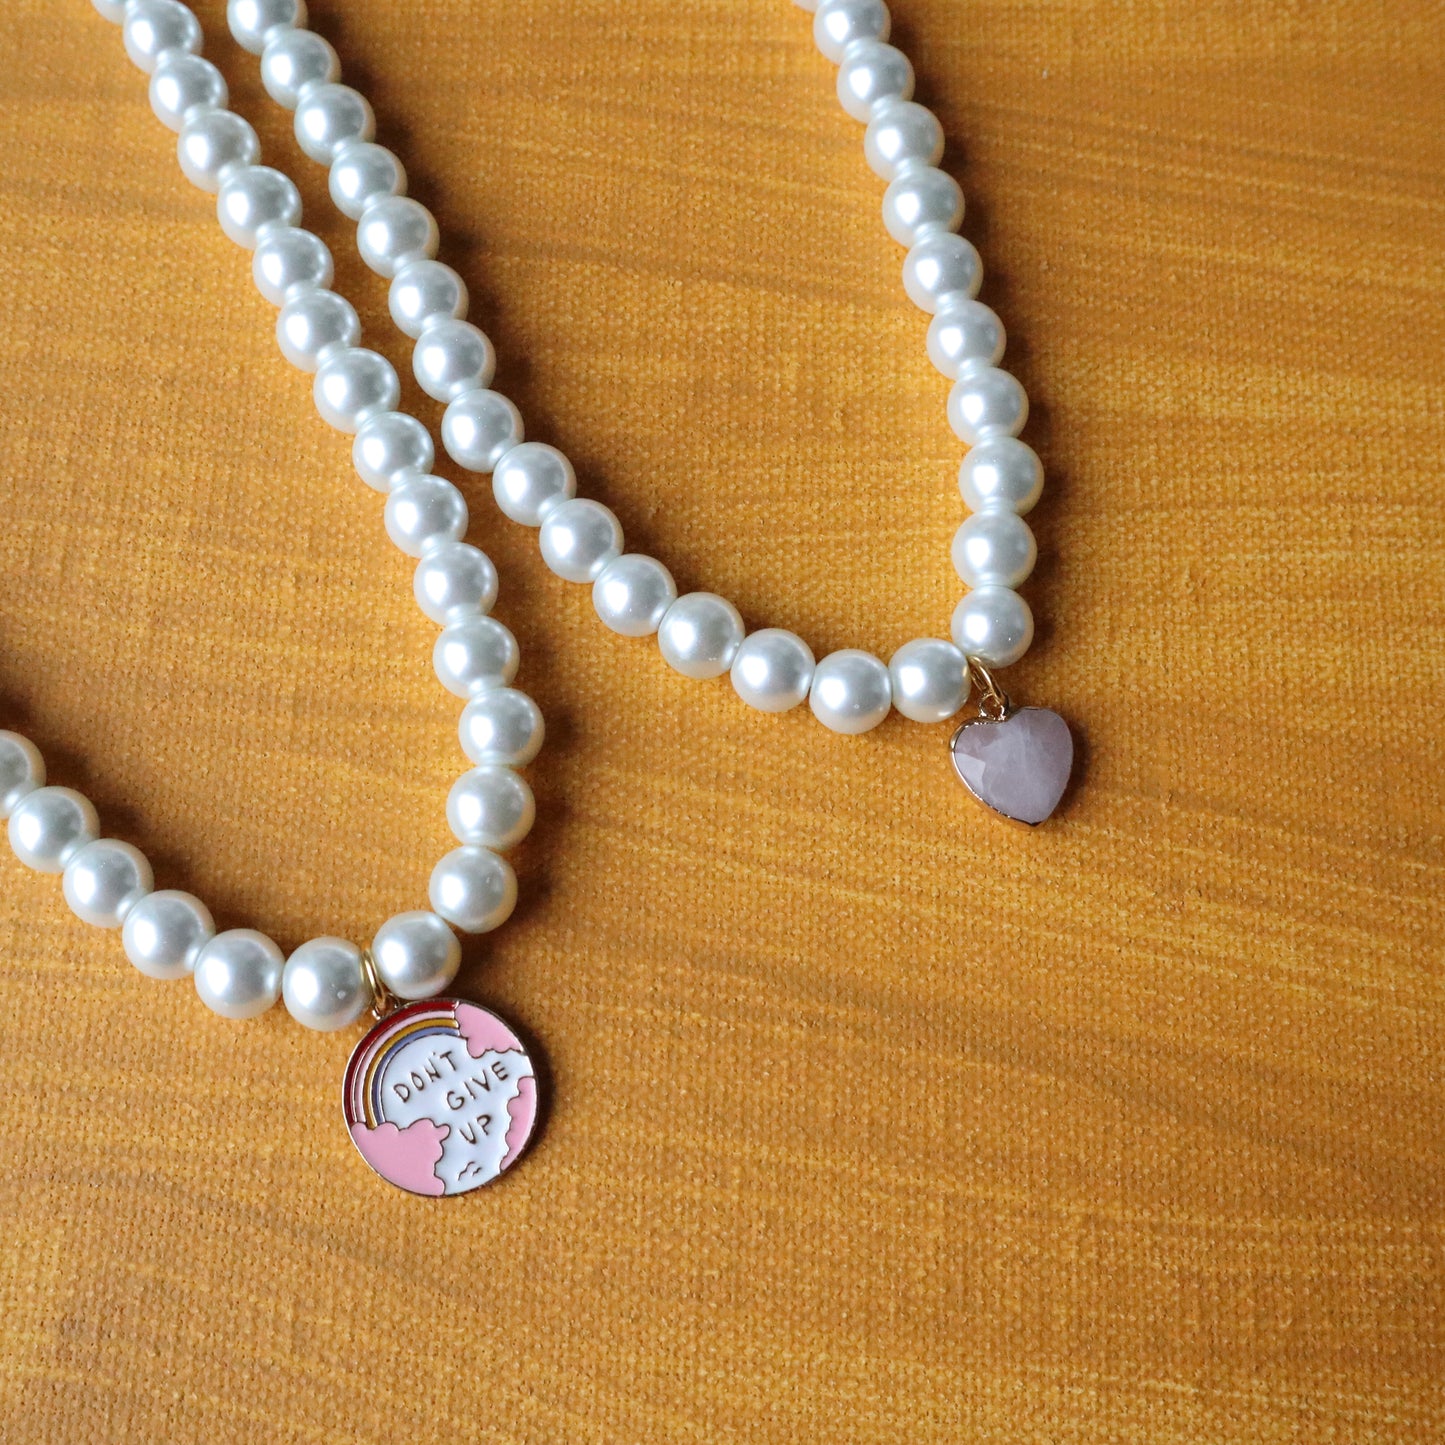 3. Faux Pearl Charm Necklace